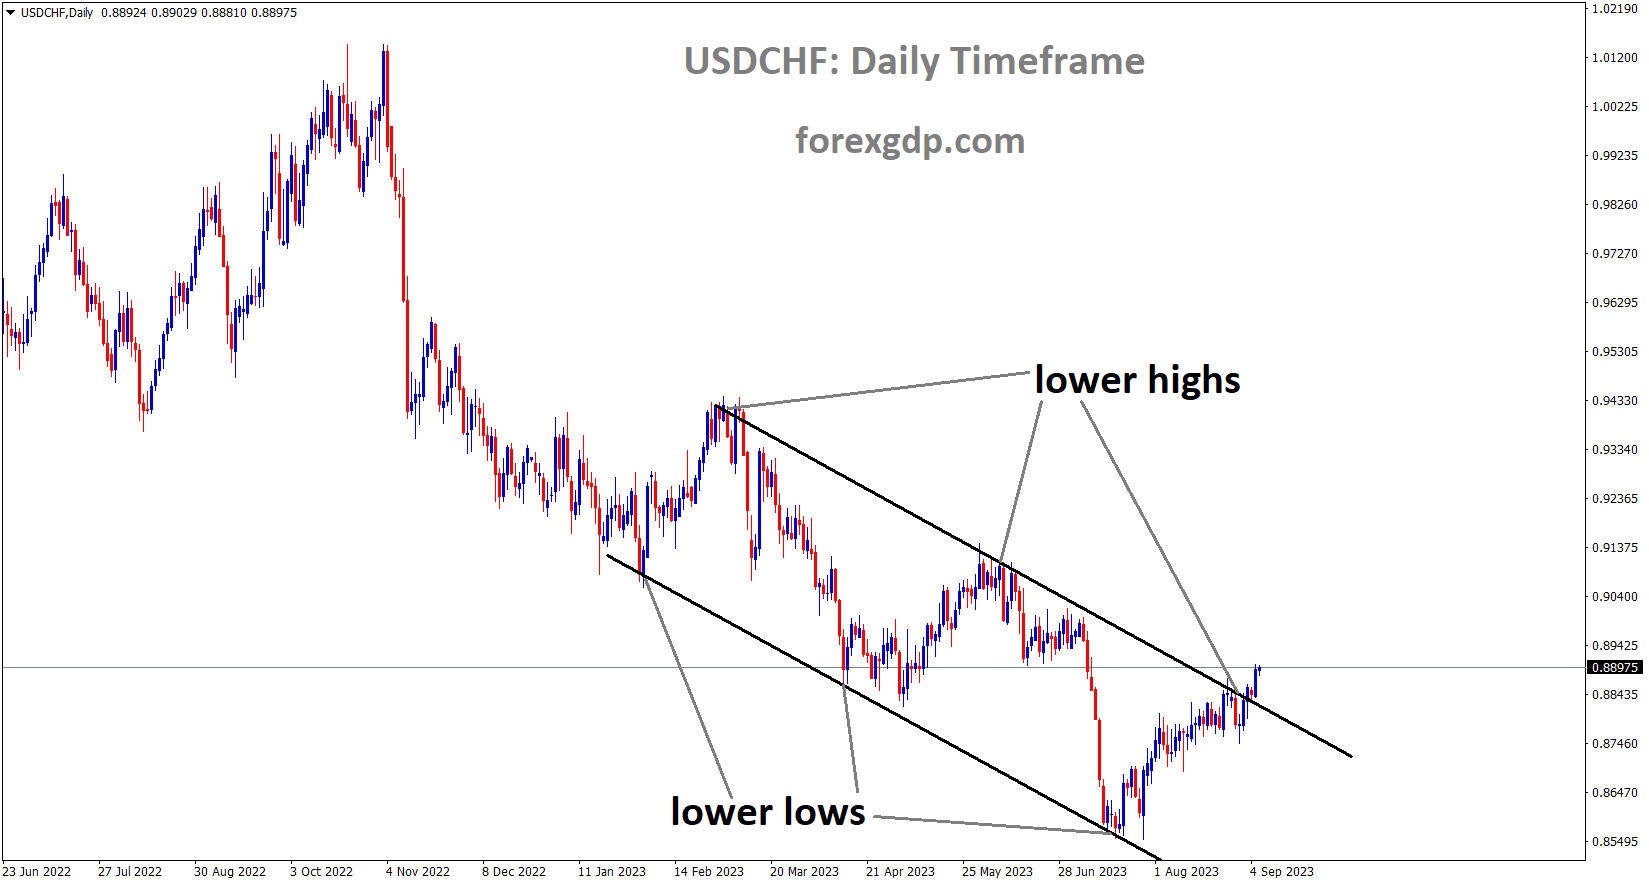 USDCHF is moving in Descending channel and the market has reached the lower high area of the channel